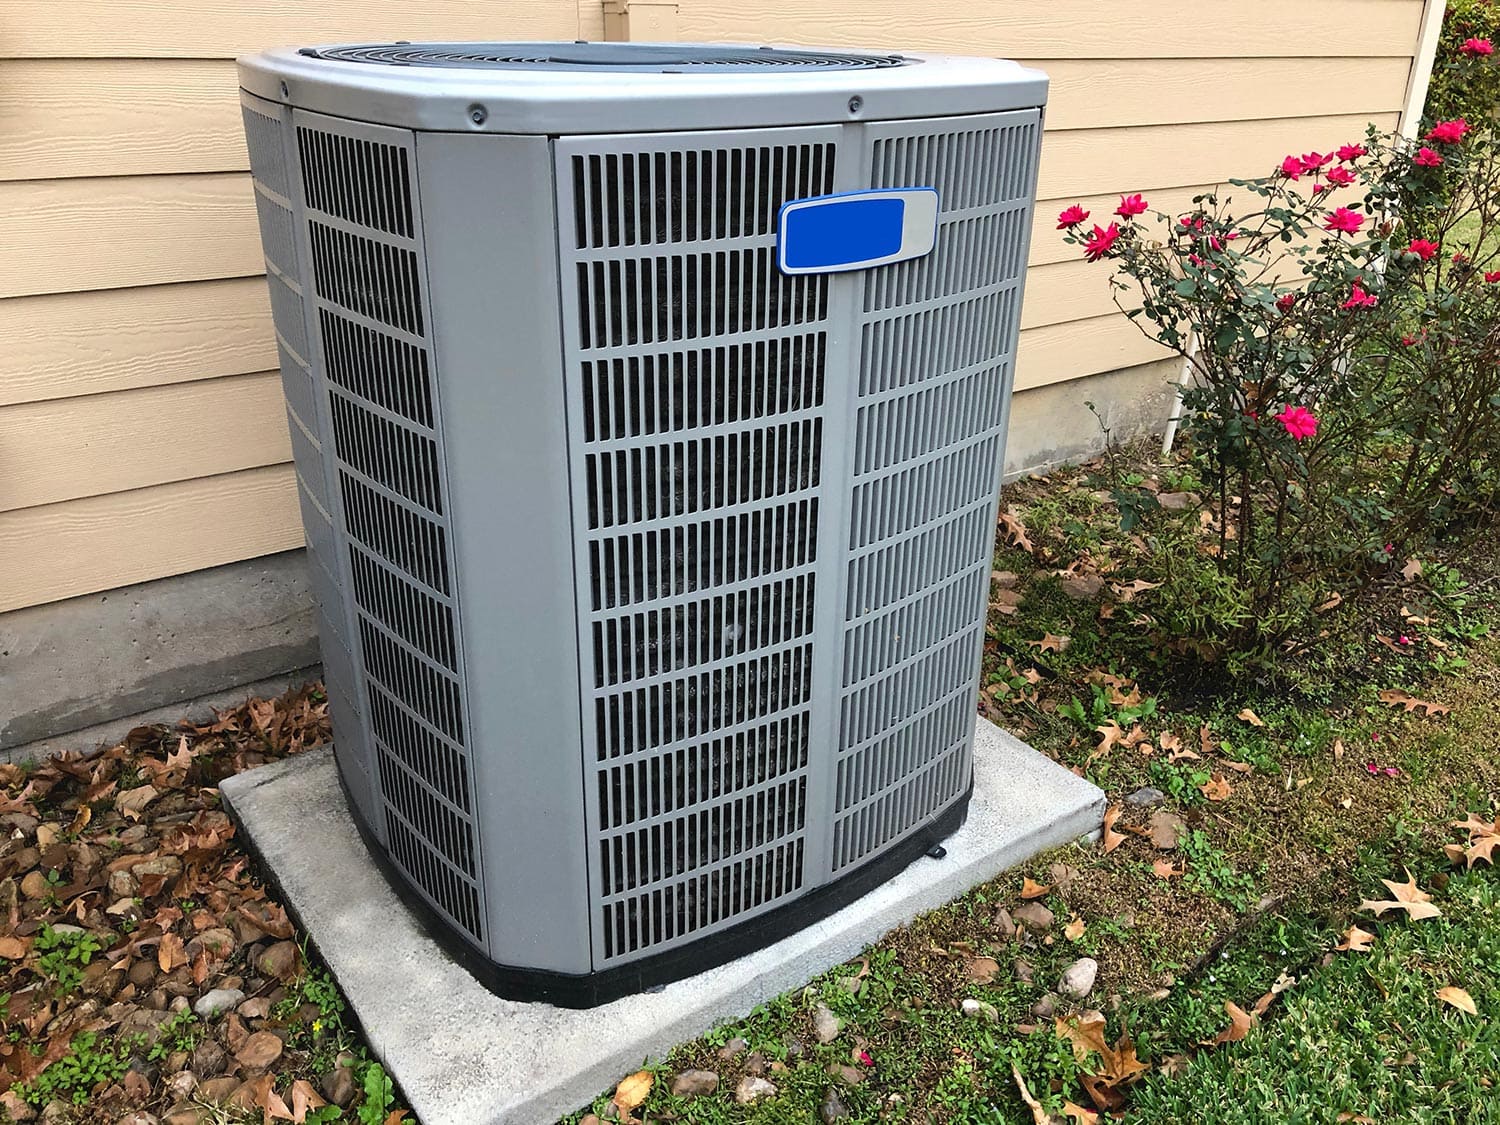 Residential-house-with-a-hvac-unit-installed